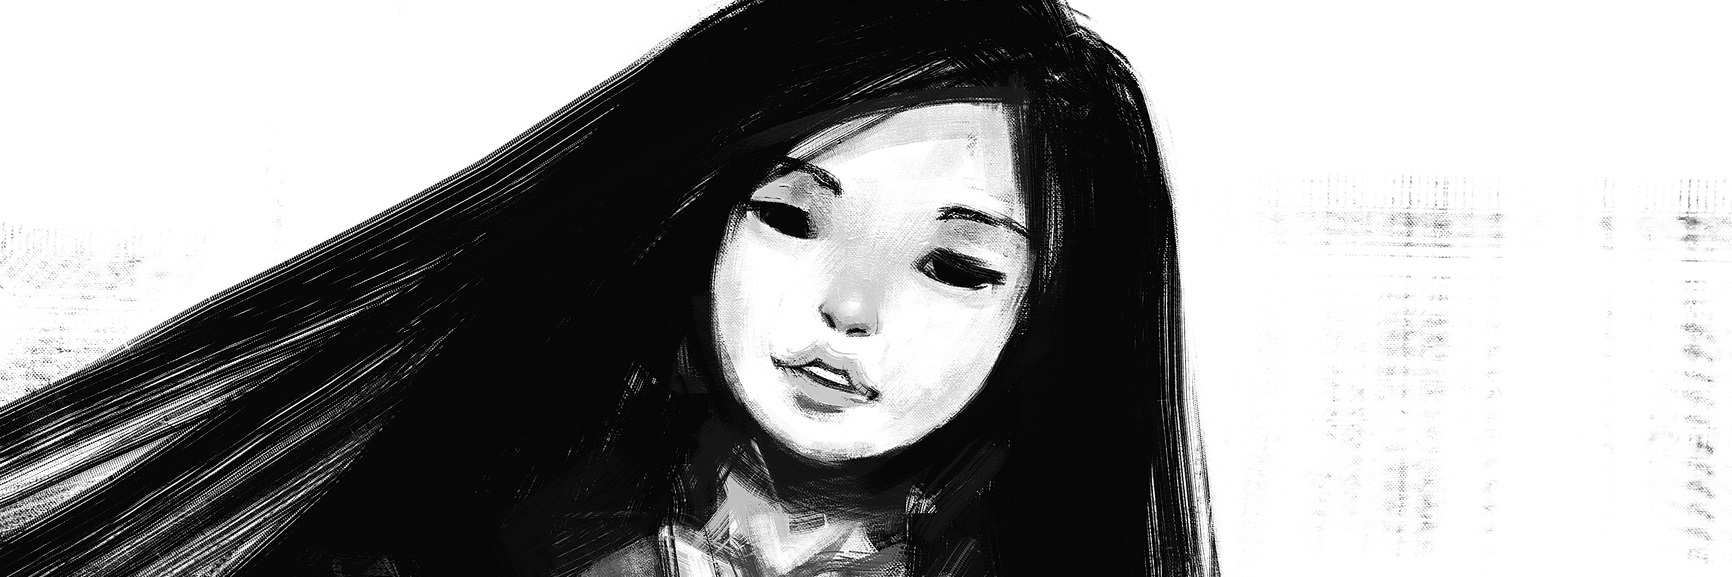 A black and white digital painting of a girl.